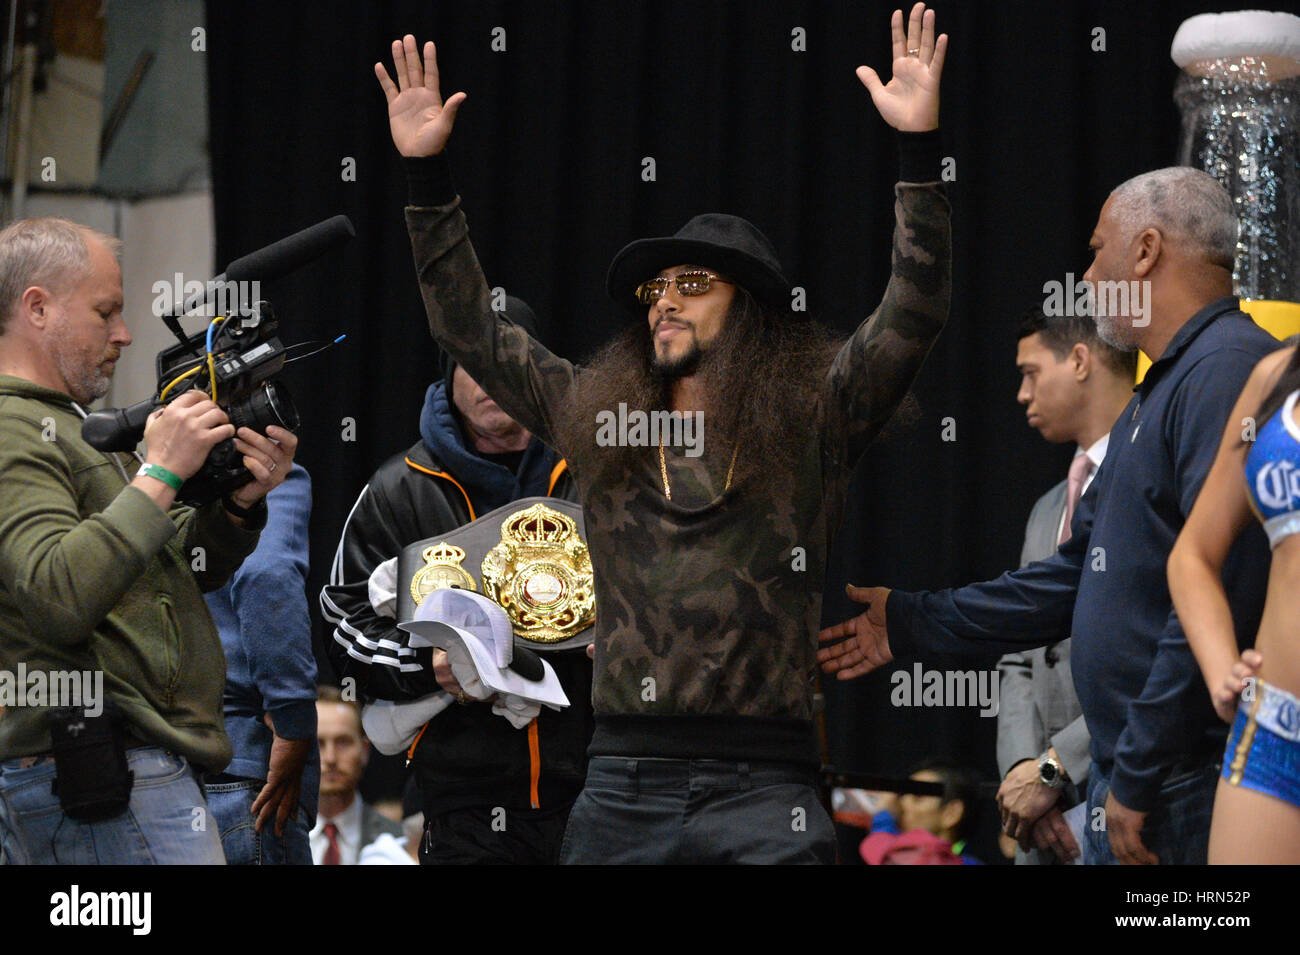 New York, USA- 03 Mar 2017- Boxer Keith Thurman at the official weigh-in for his welterweight championship fight against Danny Garcia on March 4, 2017 at the Barclay's Center in Brooklyn, New York. credit: Erik Pendzich Credit: Erik Pendzich/Alamy Live News Stock Photo